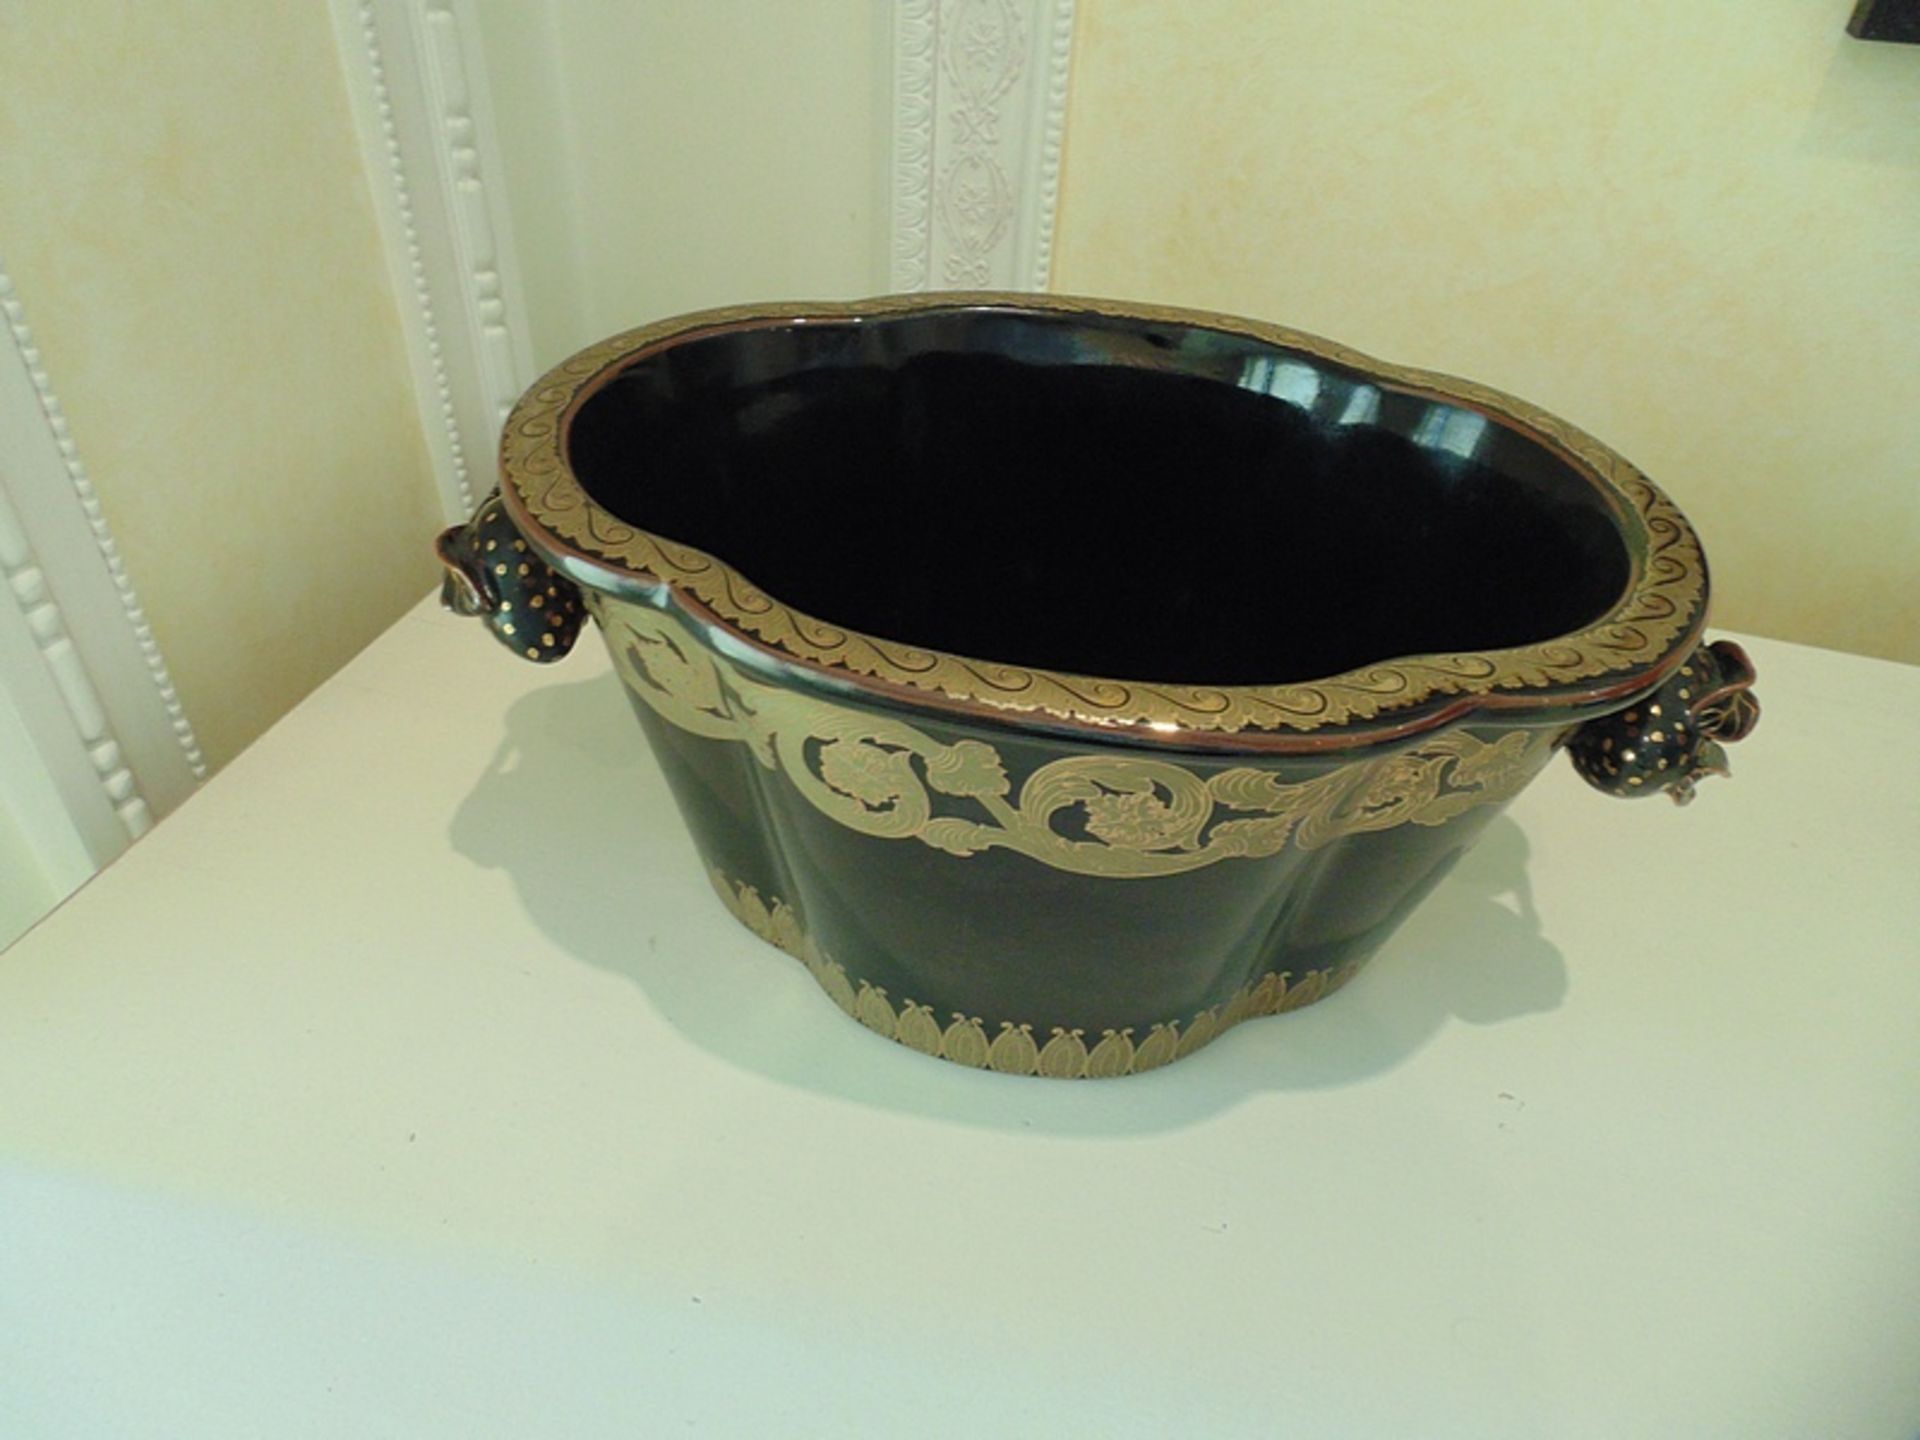 Enamelled ceramic scalloped top ornamental oval urn with applied gilded decoration 300mm x 140mm